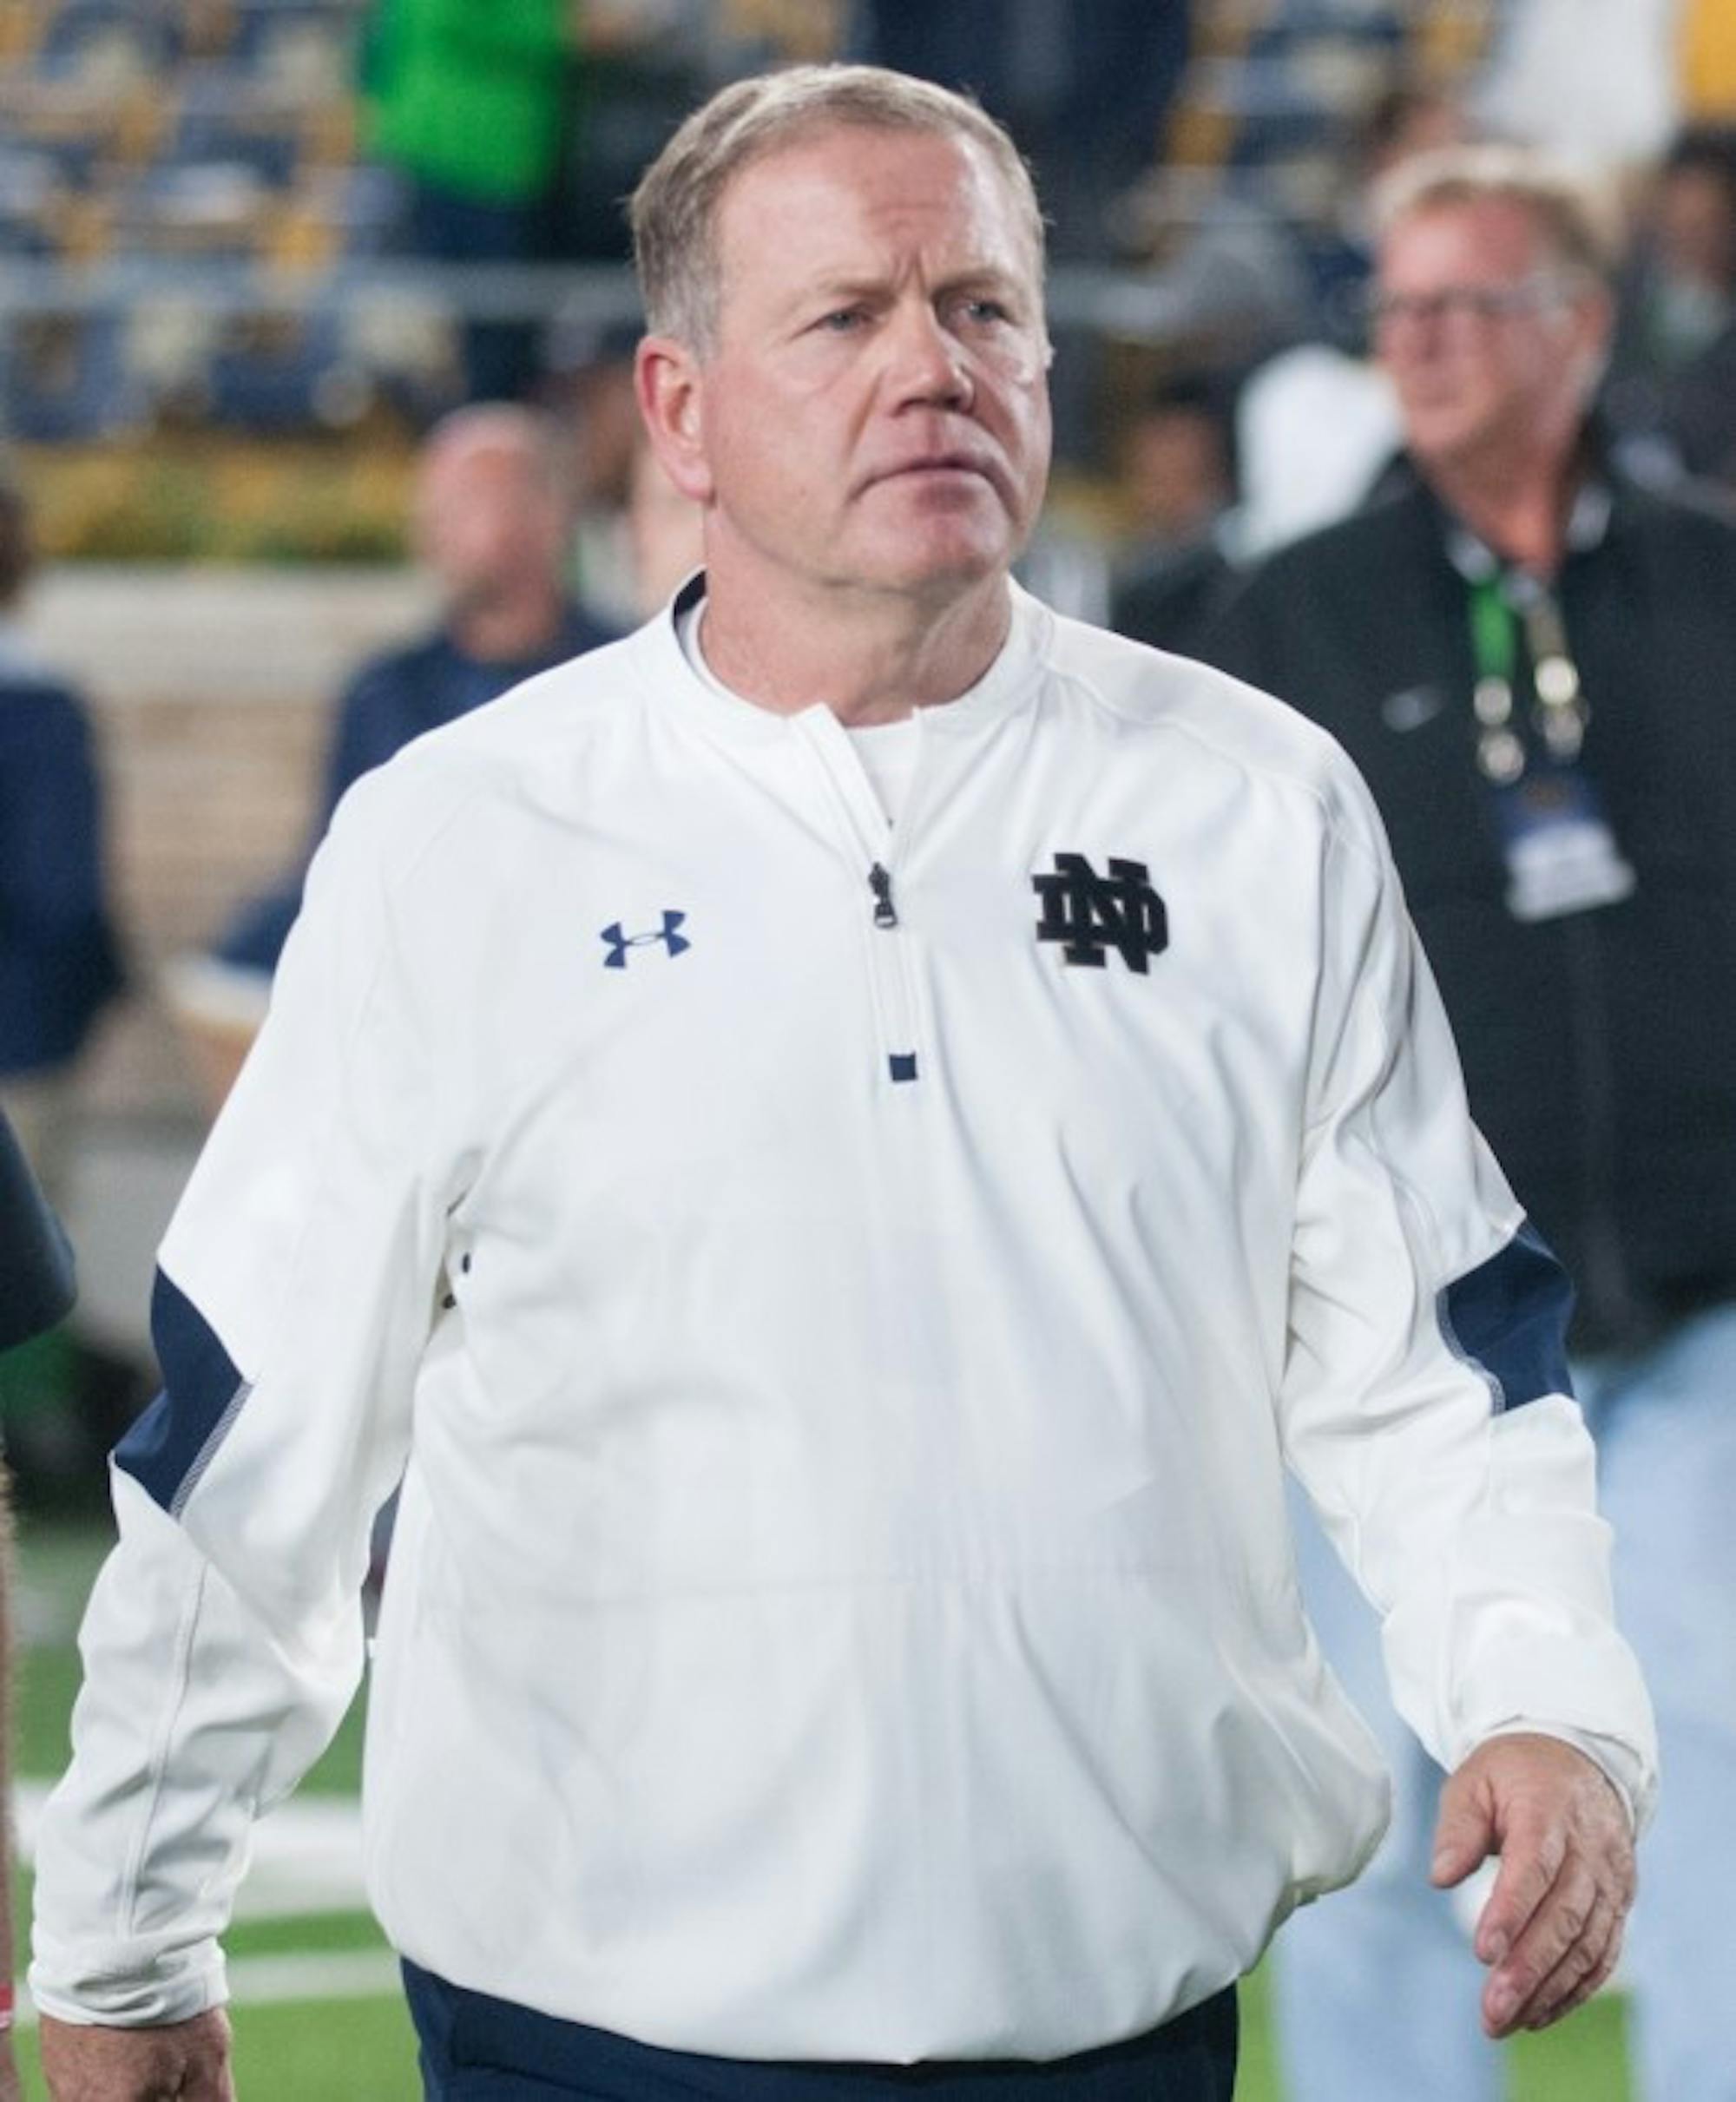 Irish head coach Brian Kelly walks off the field after Notre Dame’s 17-10 loss to Stanford on Oct. 15 at Notre Dame Stadium. Kelly and the Irish have gone 2-7 since Notre Dame lost to Stanford last season.